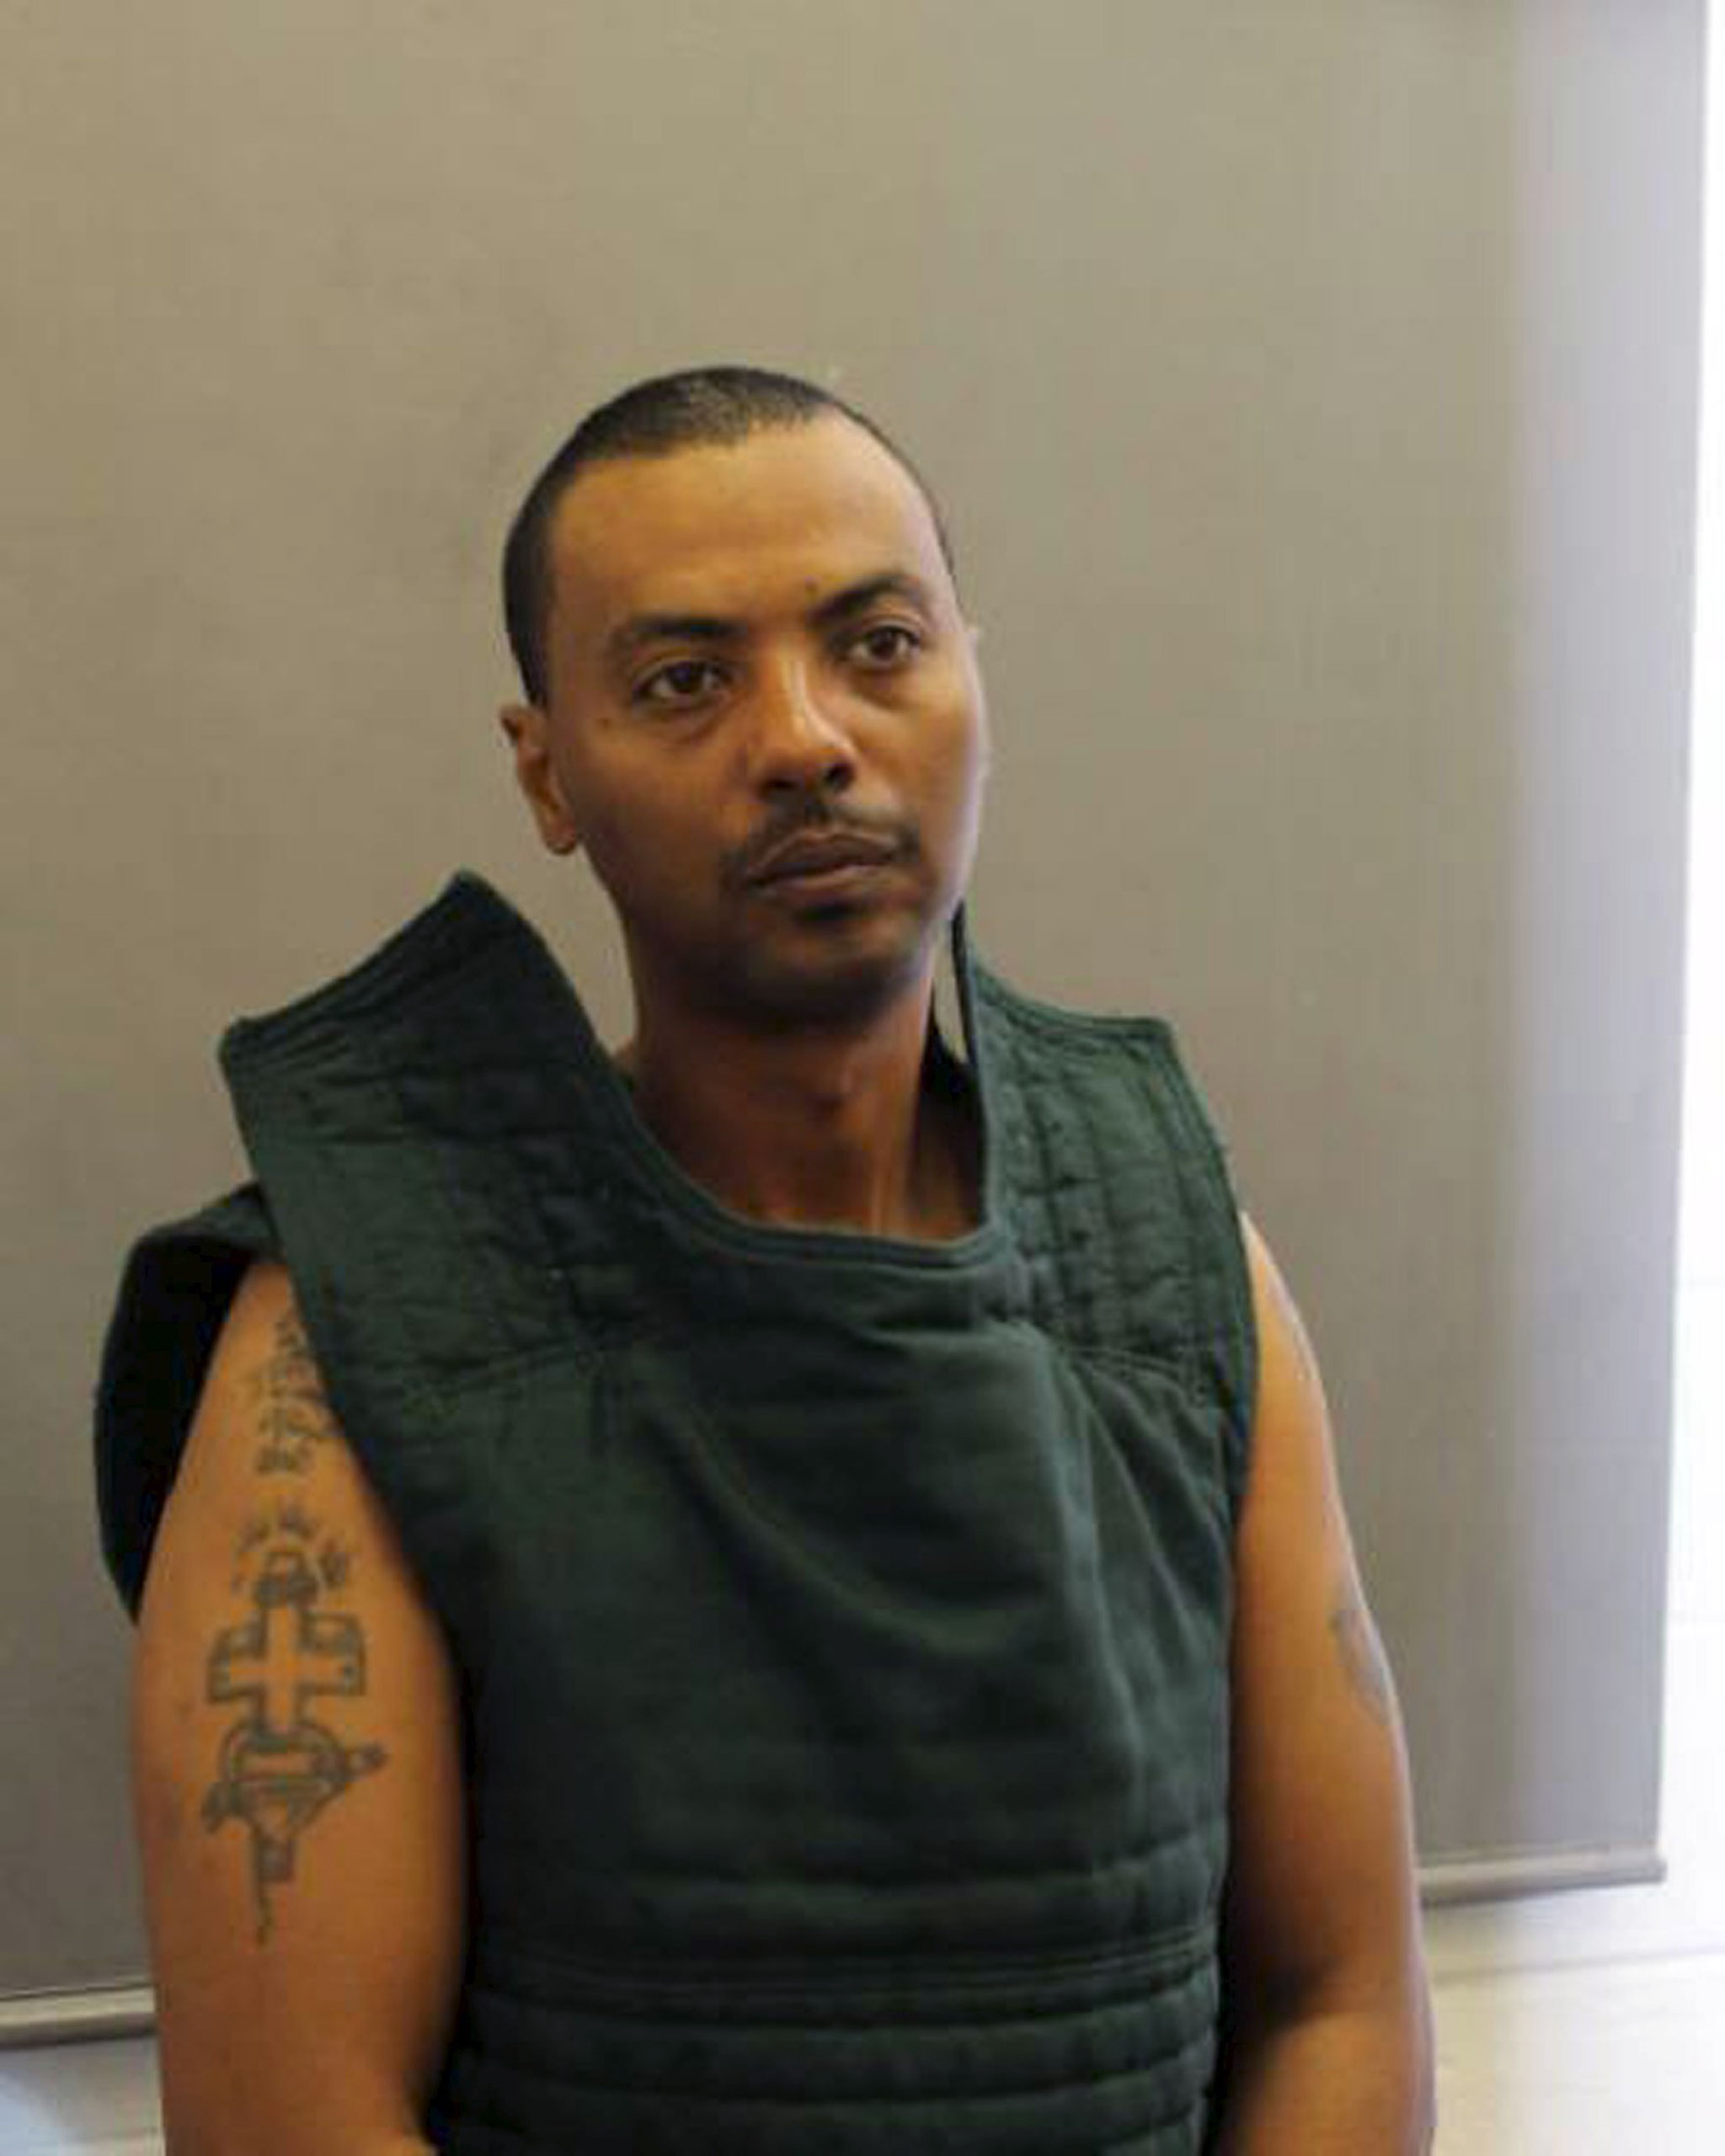 A prisoner identified as Wossen Assaye in an undated photo released by the Fairfax County Police Department in Fairfax, Va., on March 31, 2015.